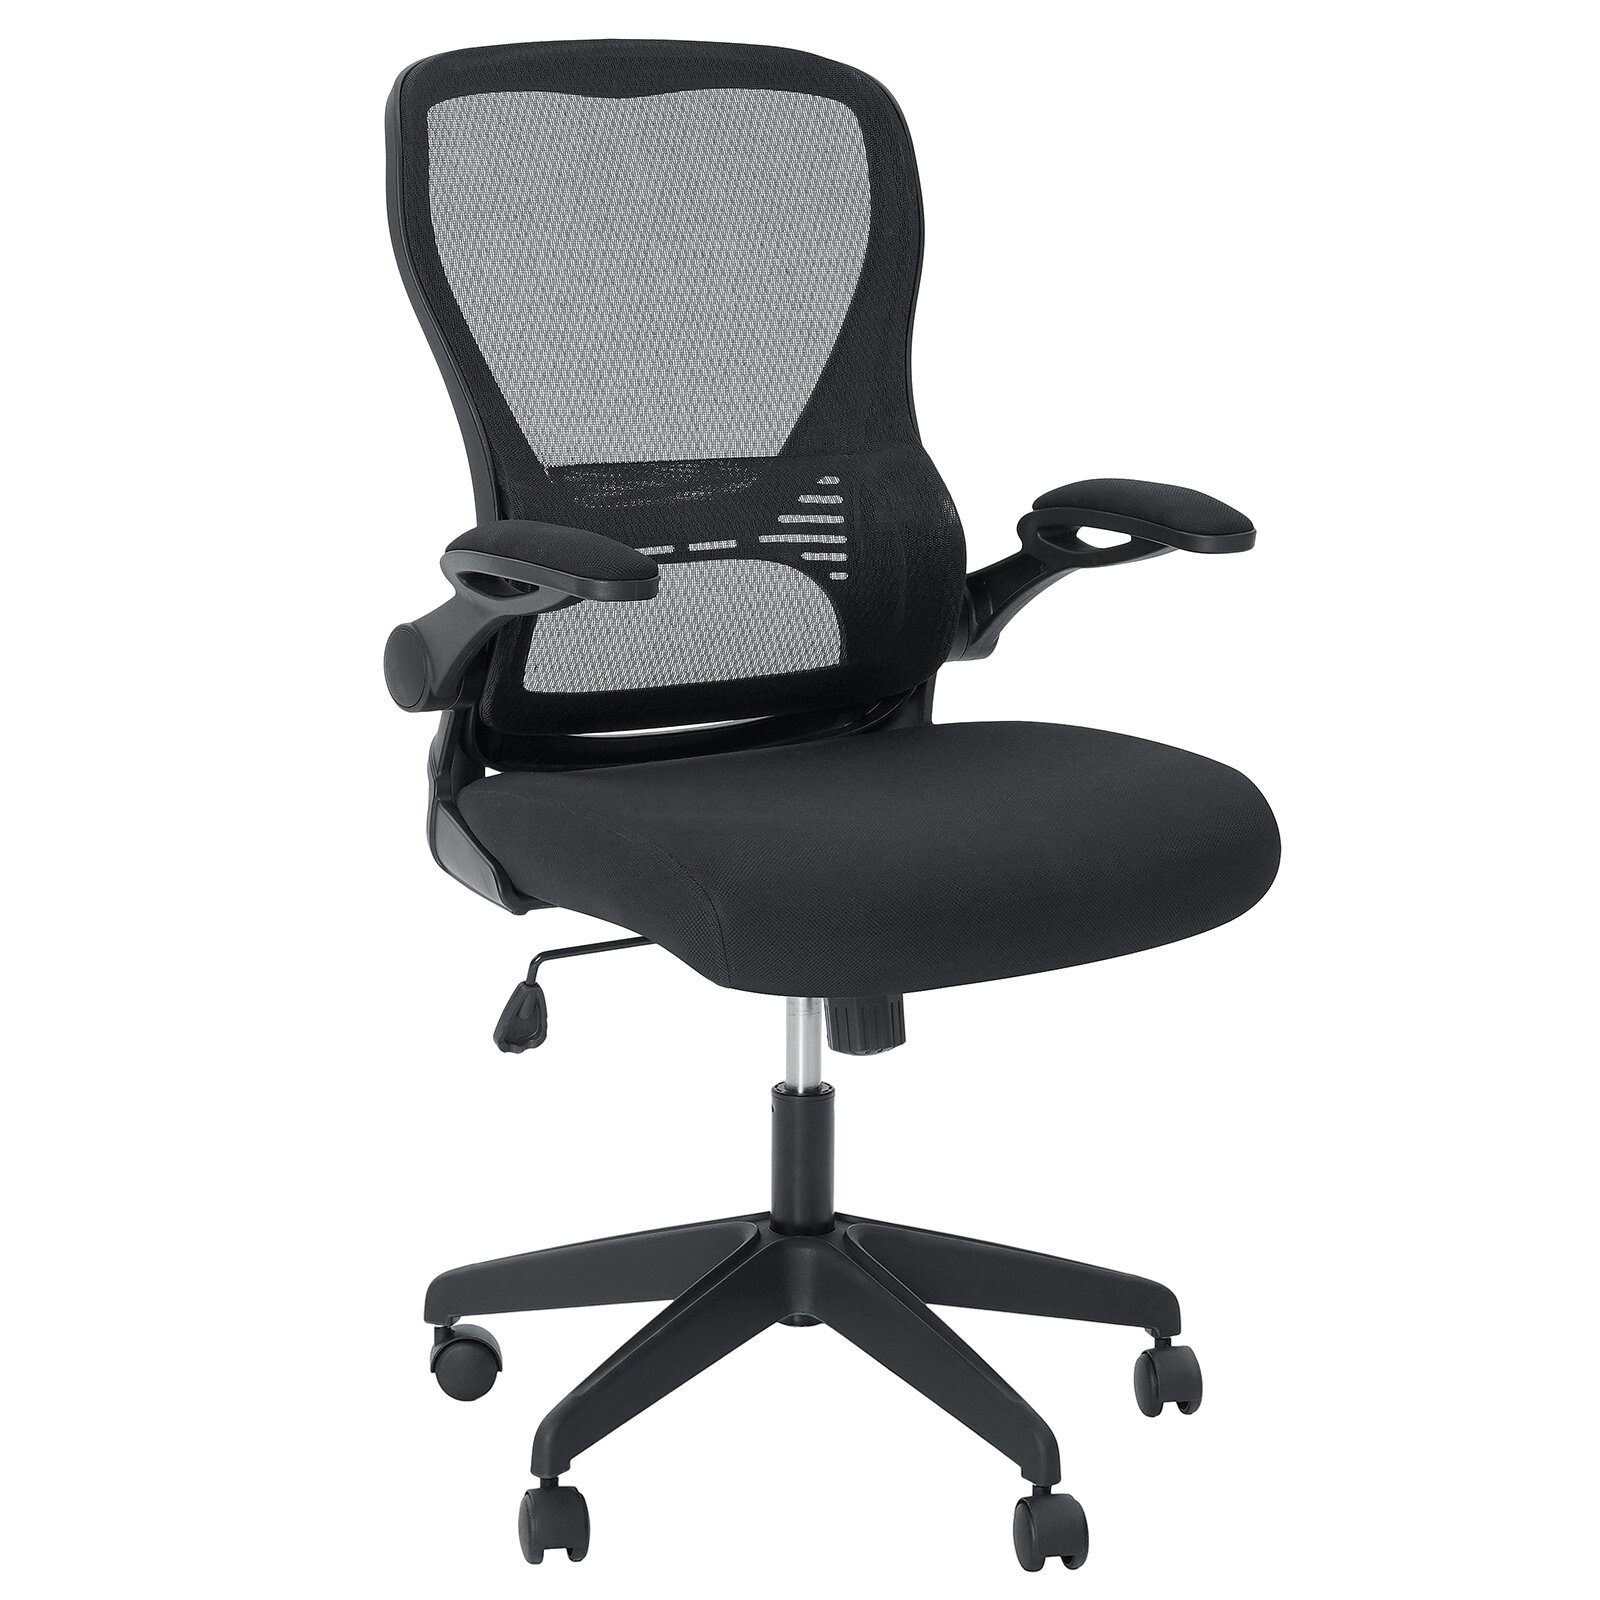 

Hoffree Office Chair Ergonomic Desk Chair with Adjustable Height Lumbar Support High Back Mesh Computer Chair with Flip